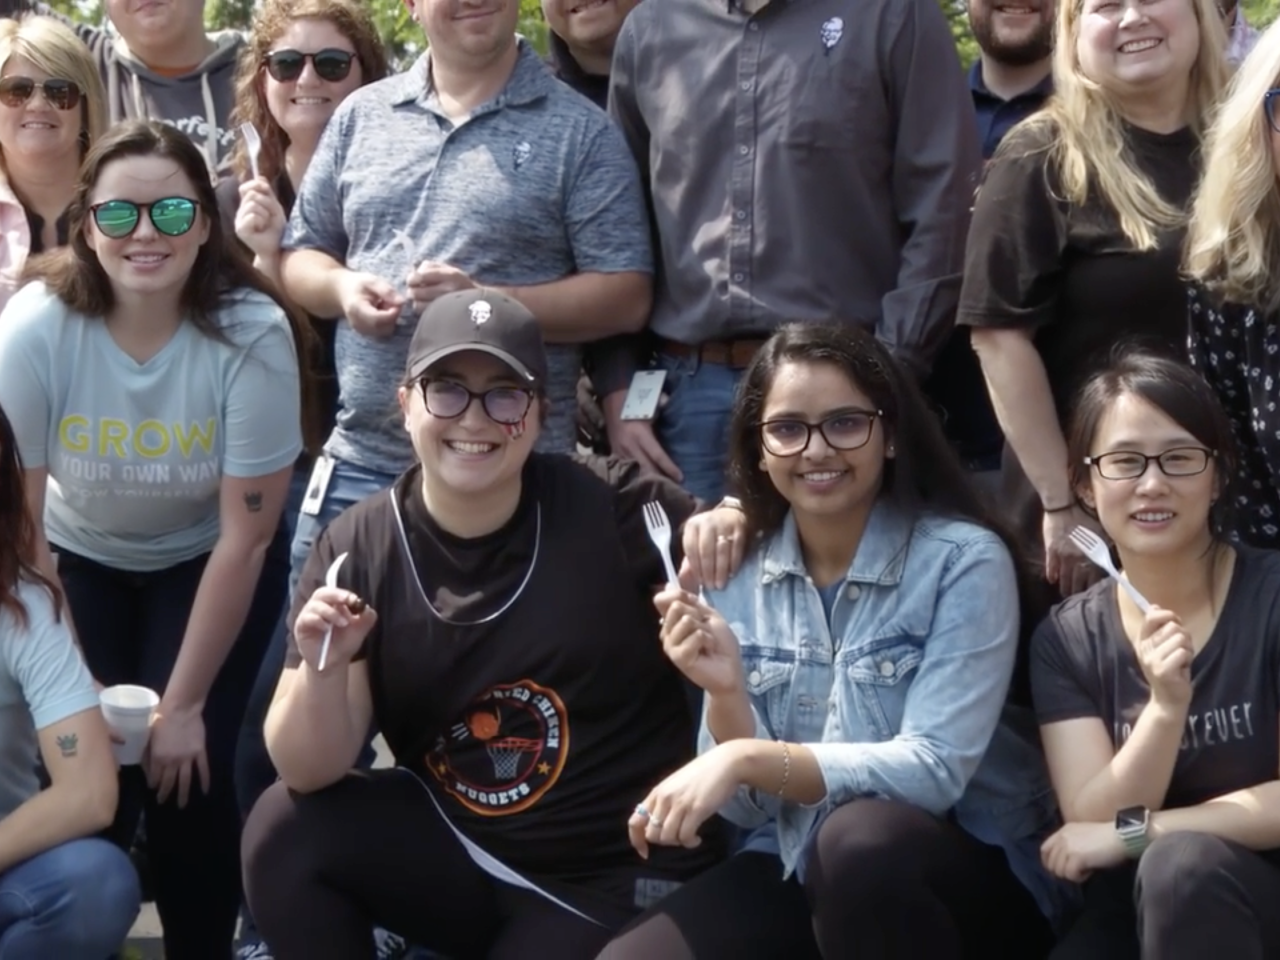 A group photo of people holding plastic forks